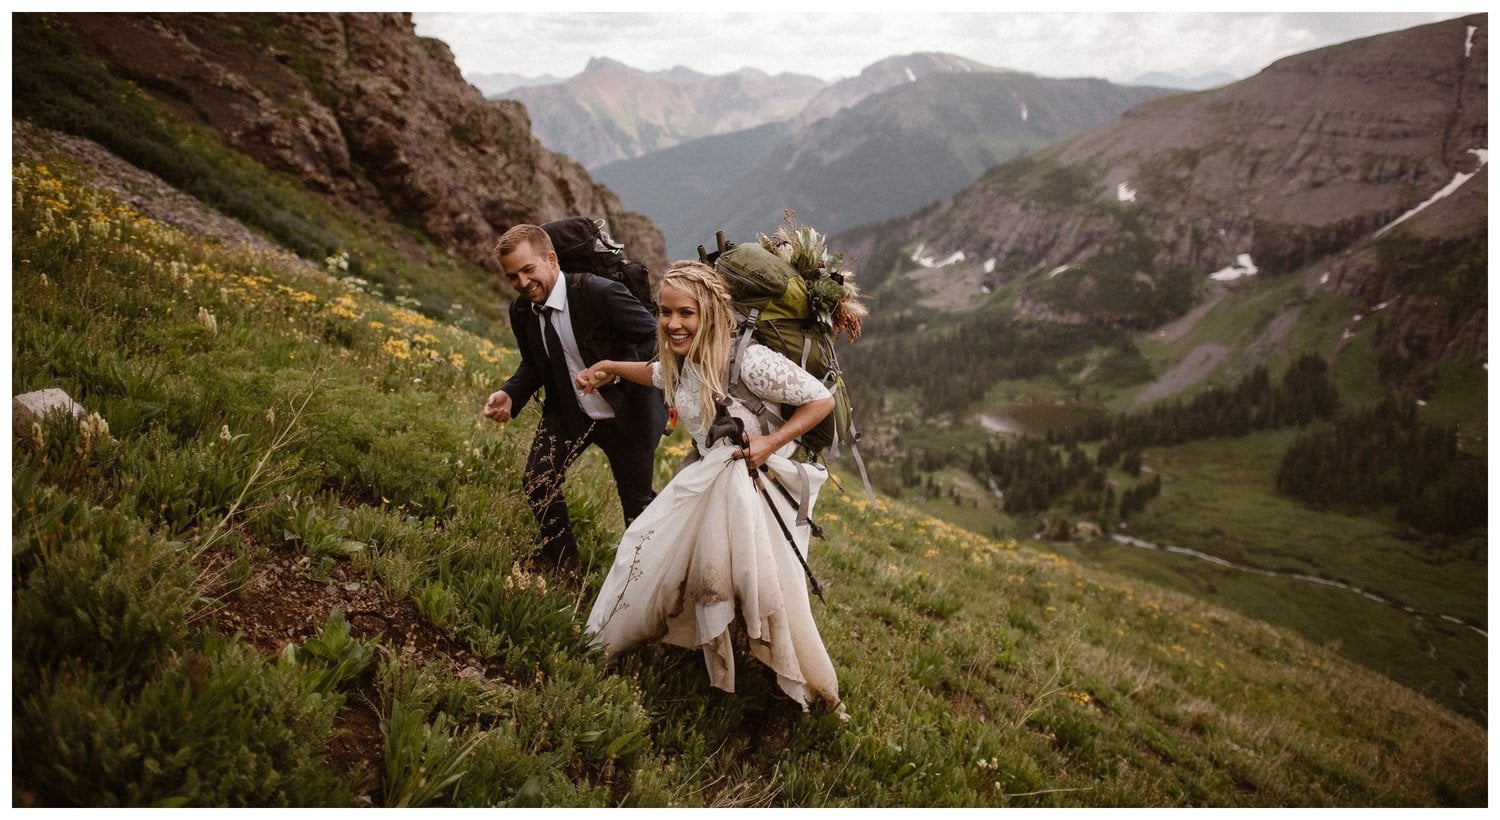 Bride and groom hold hands and climb up a grassy hill covered in yellow wildflowers. They are wearing wedding attire and there are mountains in the background. 